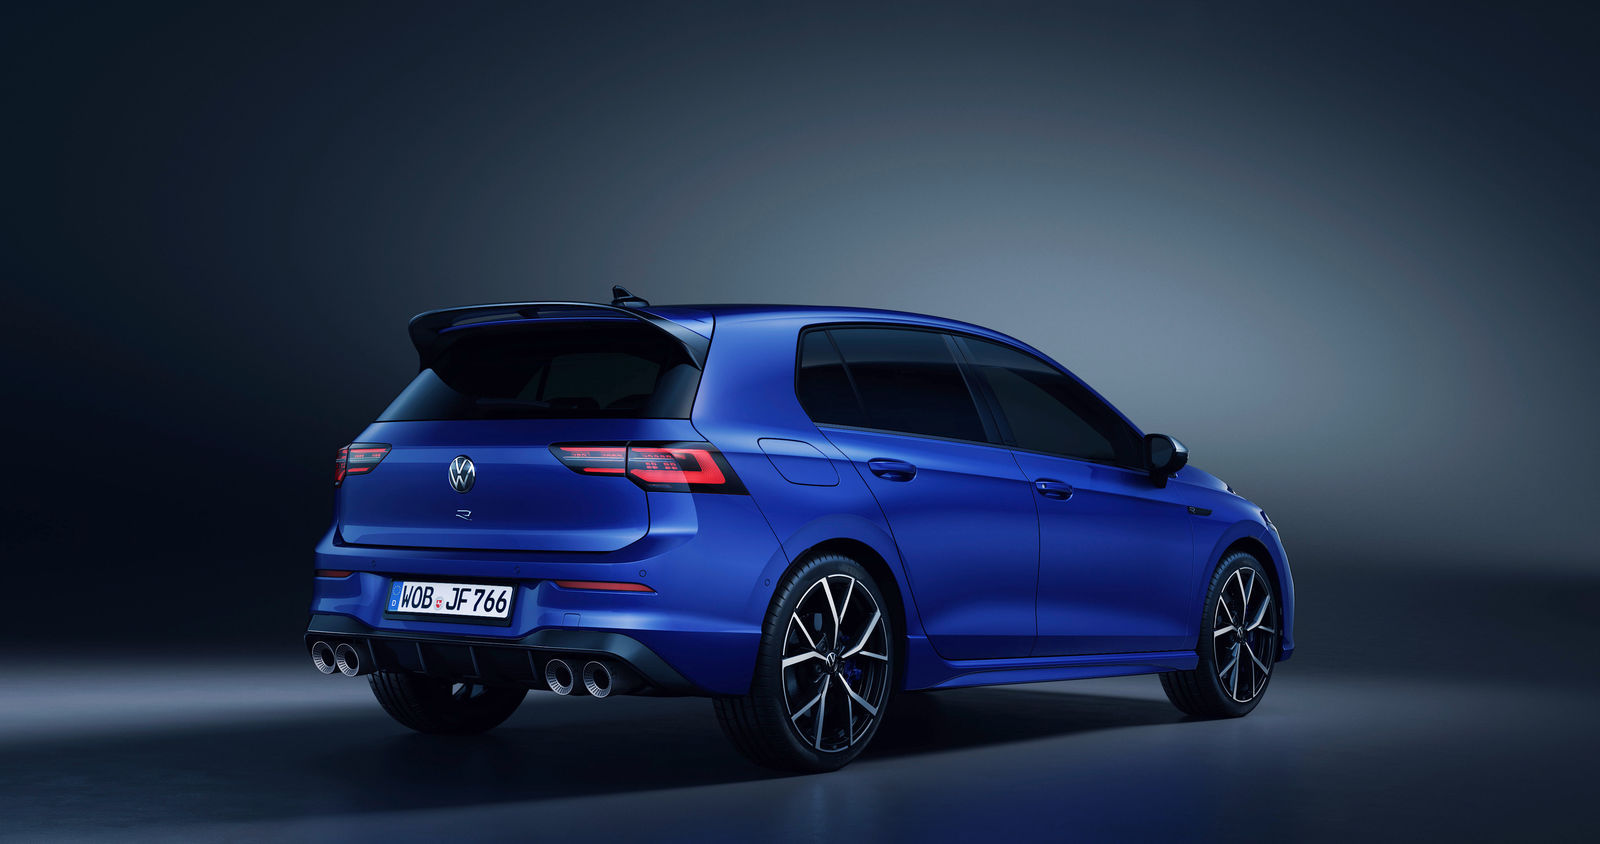 The new Golf R gets off to a flying start: world premiere of the most  powerful series-production Golf of all times